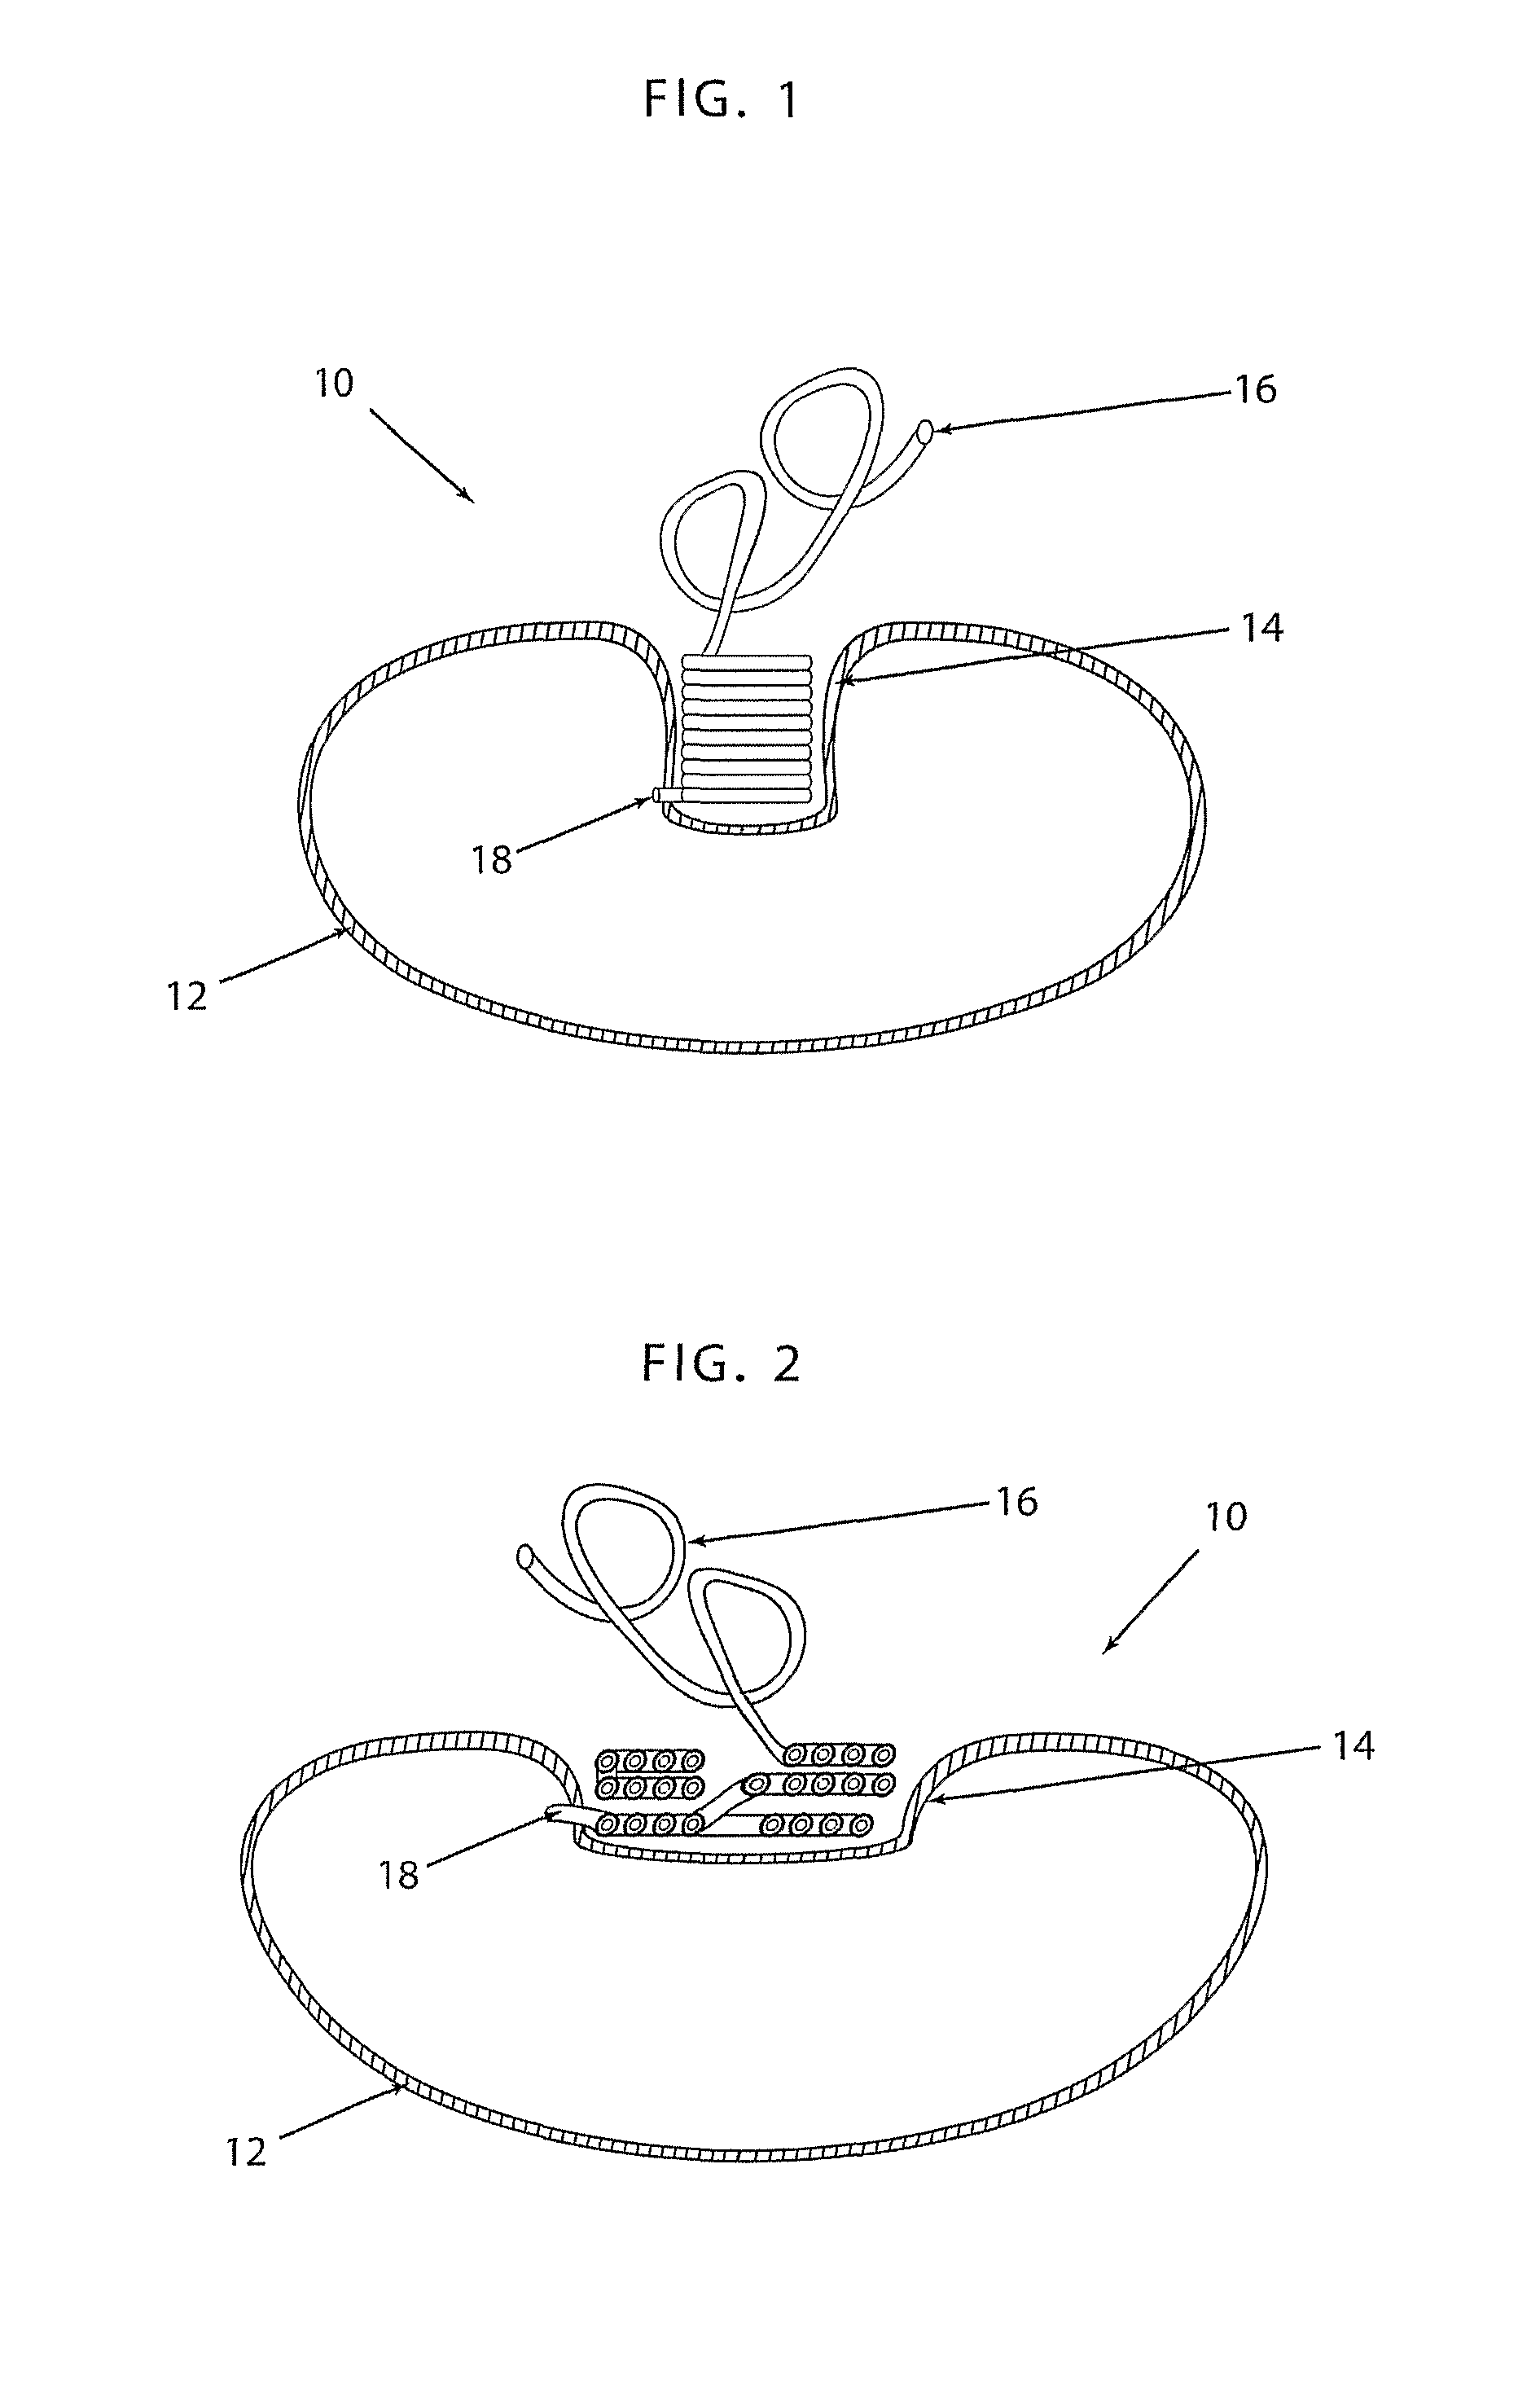 Apparatus and method for volume adjustment of intragastric balloons